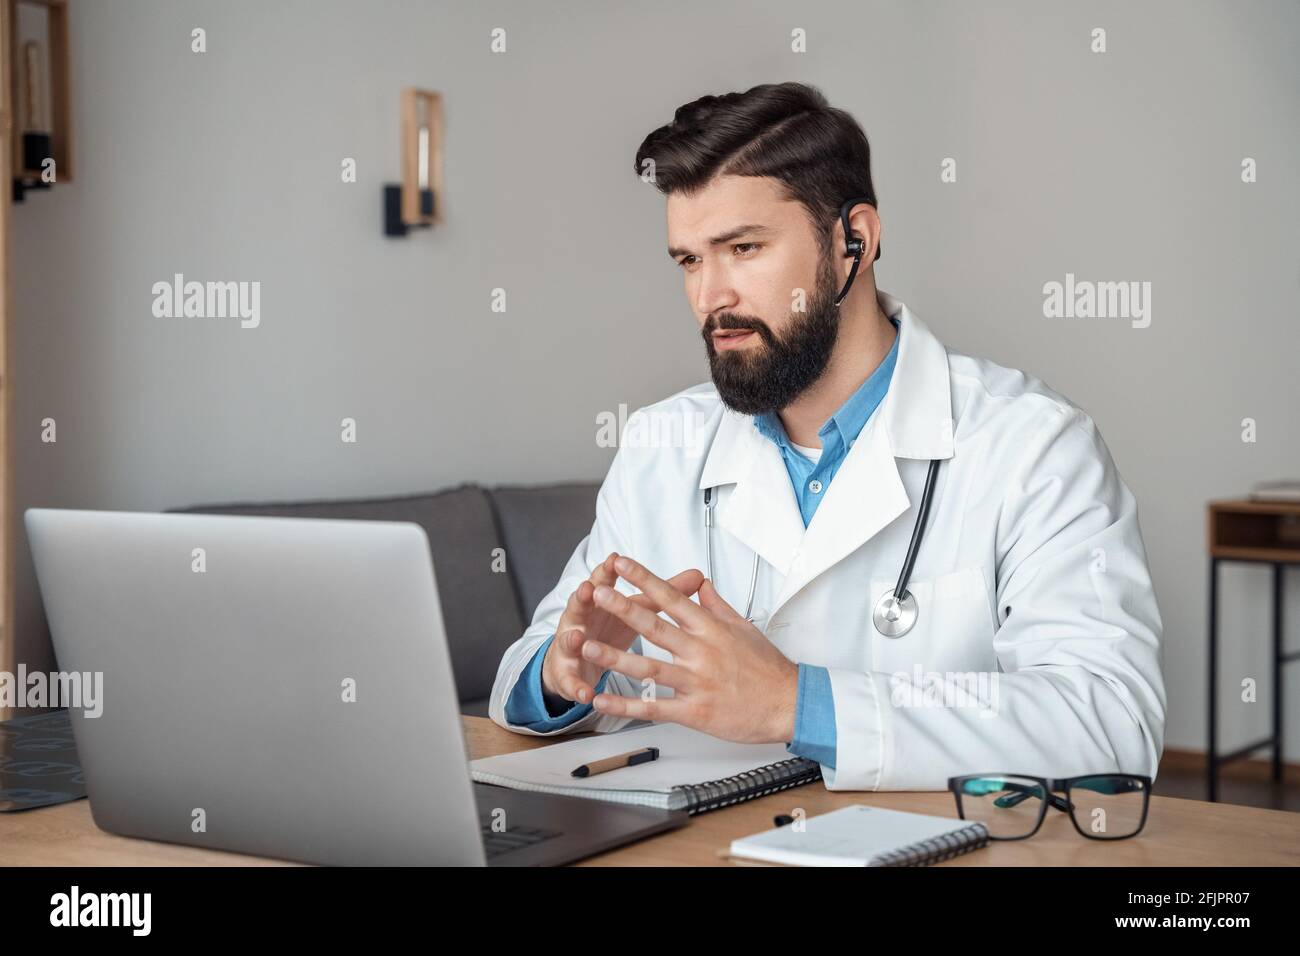 Caucasian man doctor in wireless headphones consulting patient remotely online Stock Photo